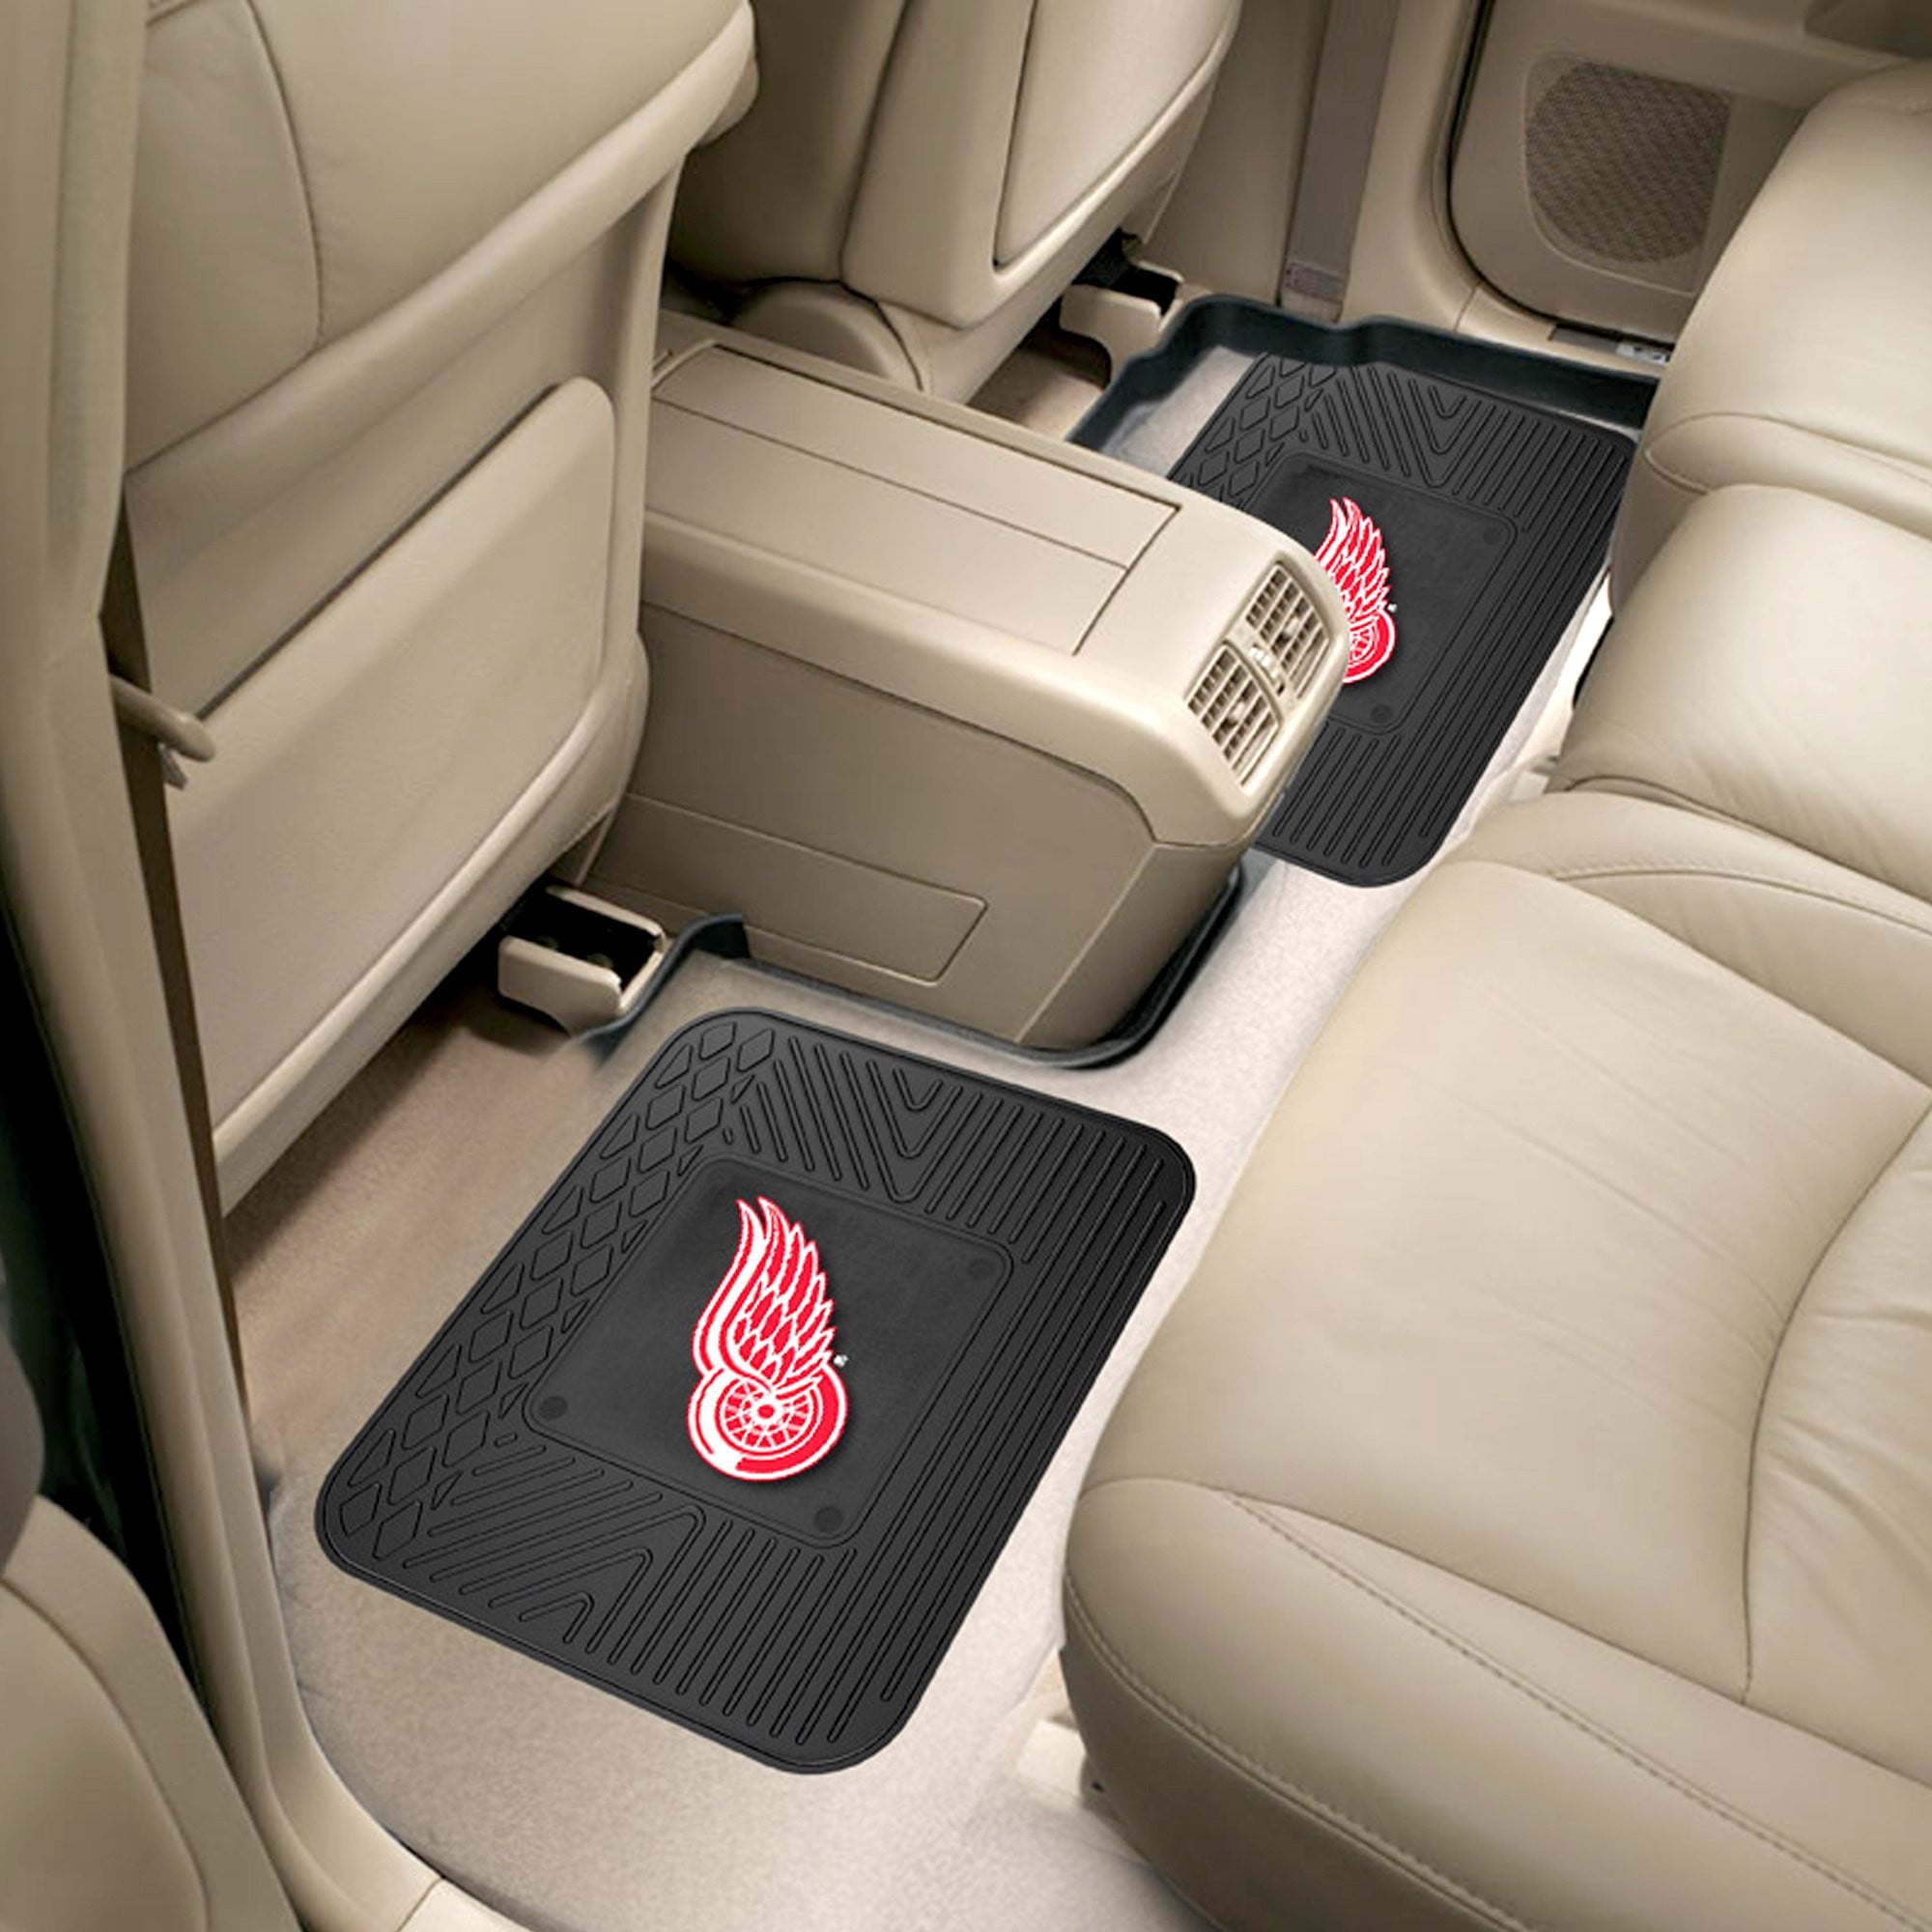 NHL - Detroit Red Wings 2 Utility Car Mats